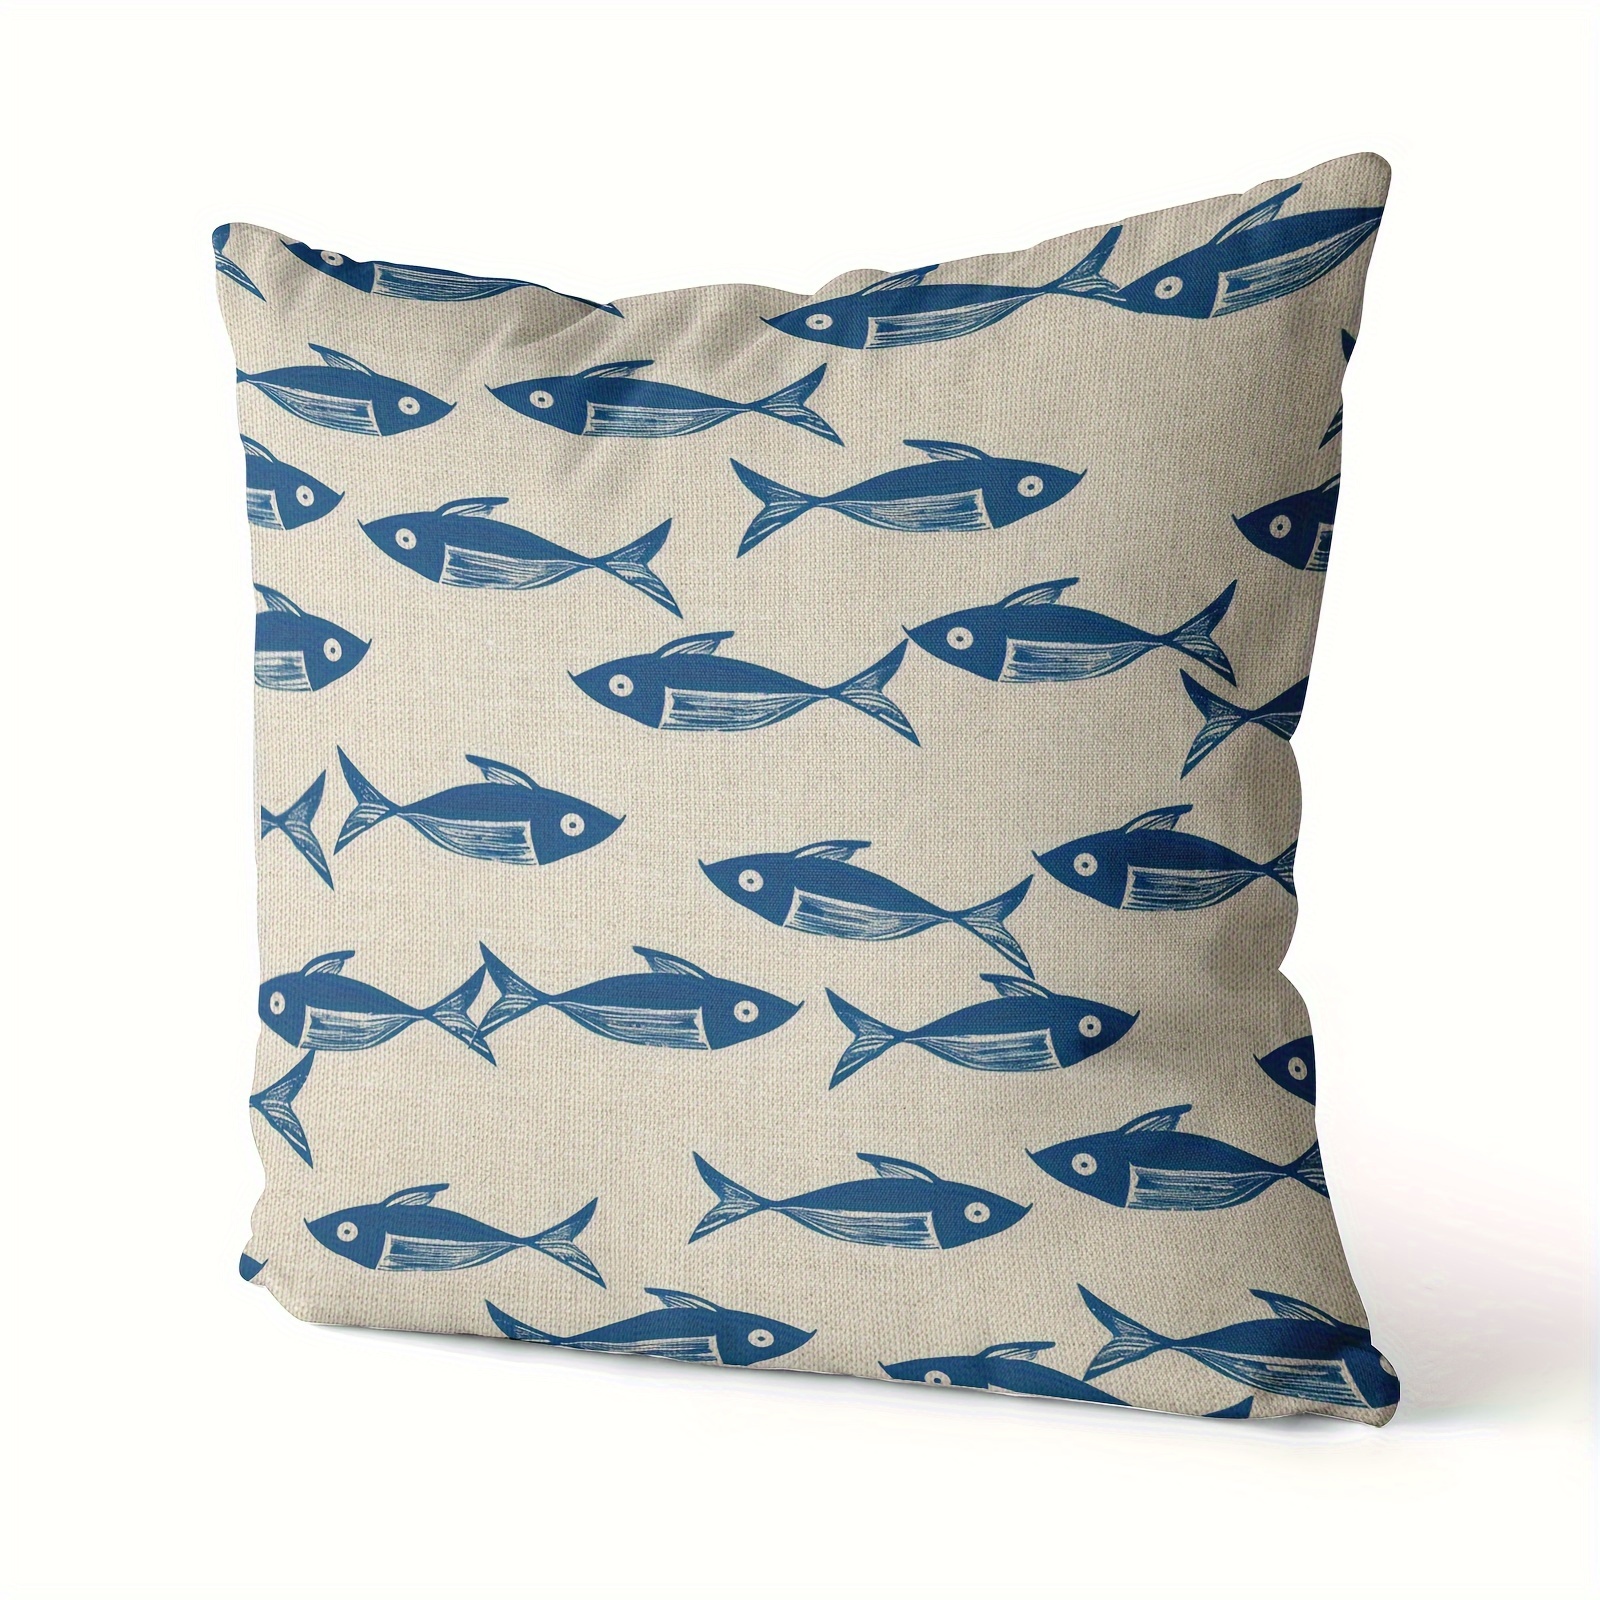 

Chic White & Blue Fish Pattern Throw Pillow Cover 18x18in - Decorative Cushion Case For Sofa, Bedroom, And Living Room - Machine Washable With Zip Closure